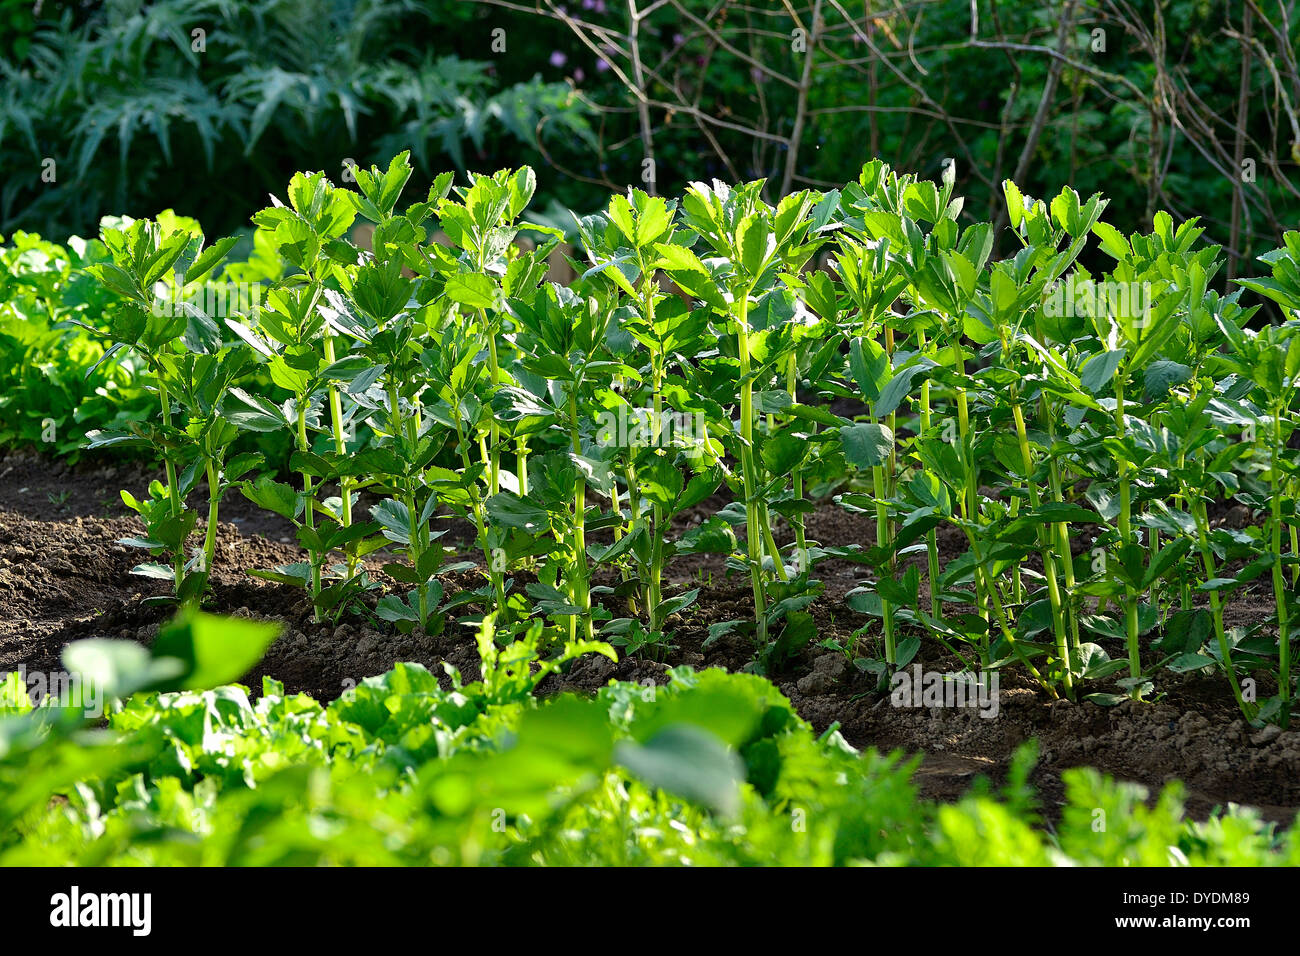 Vegetable bed of broad bean (Vicia faba), in a vegetable garden. Stock Photo